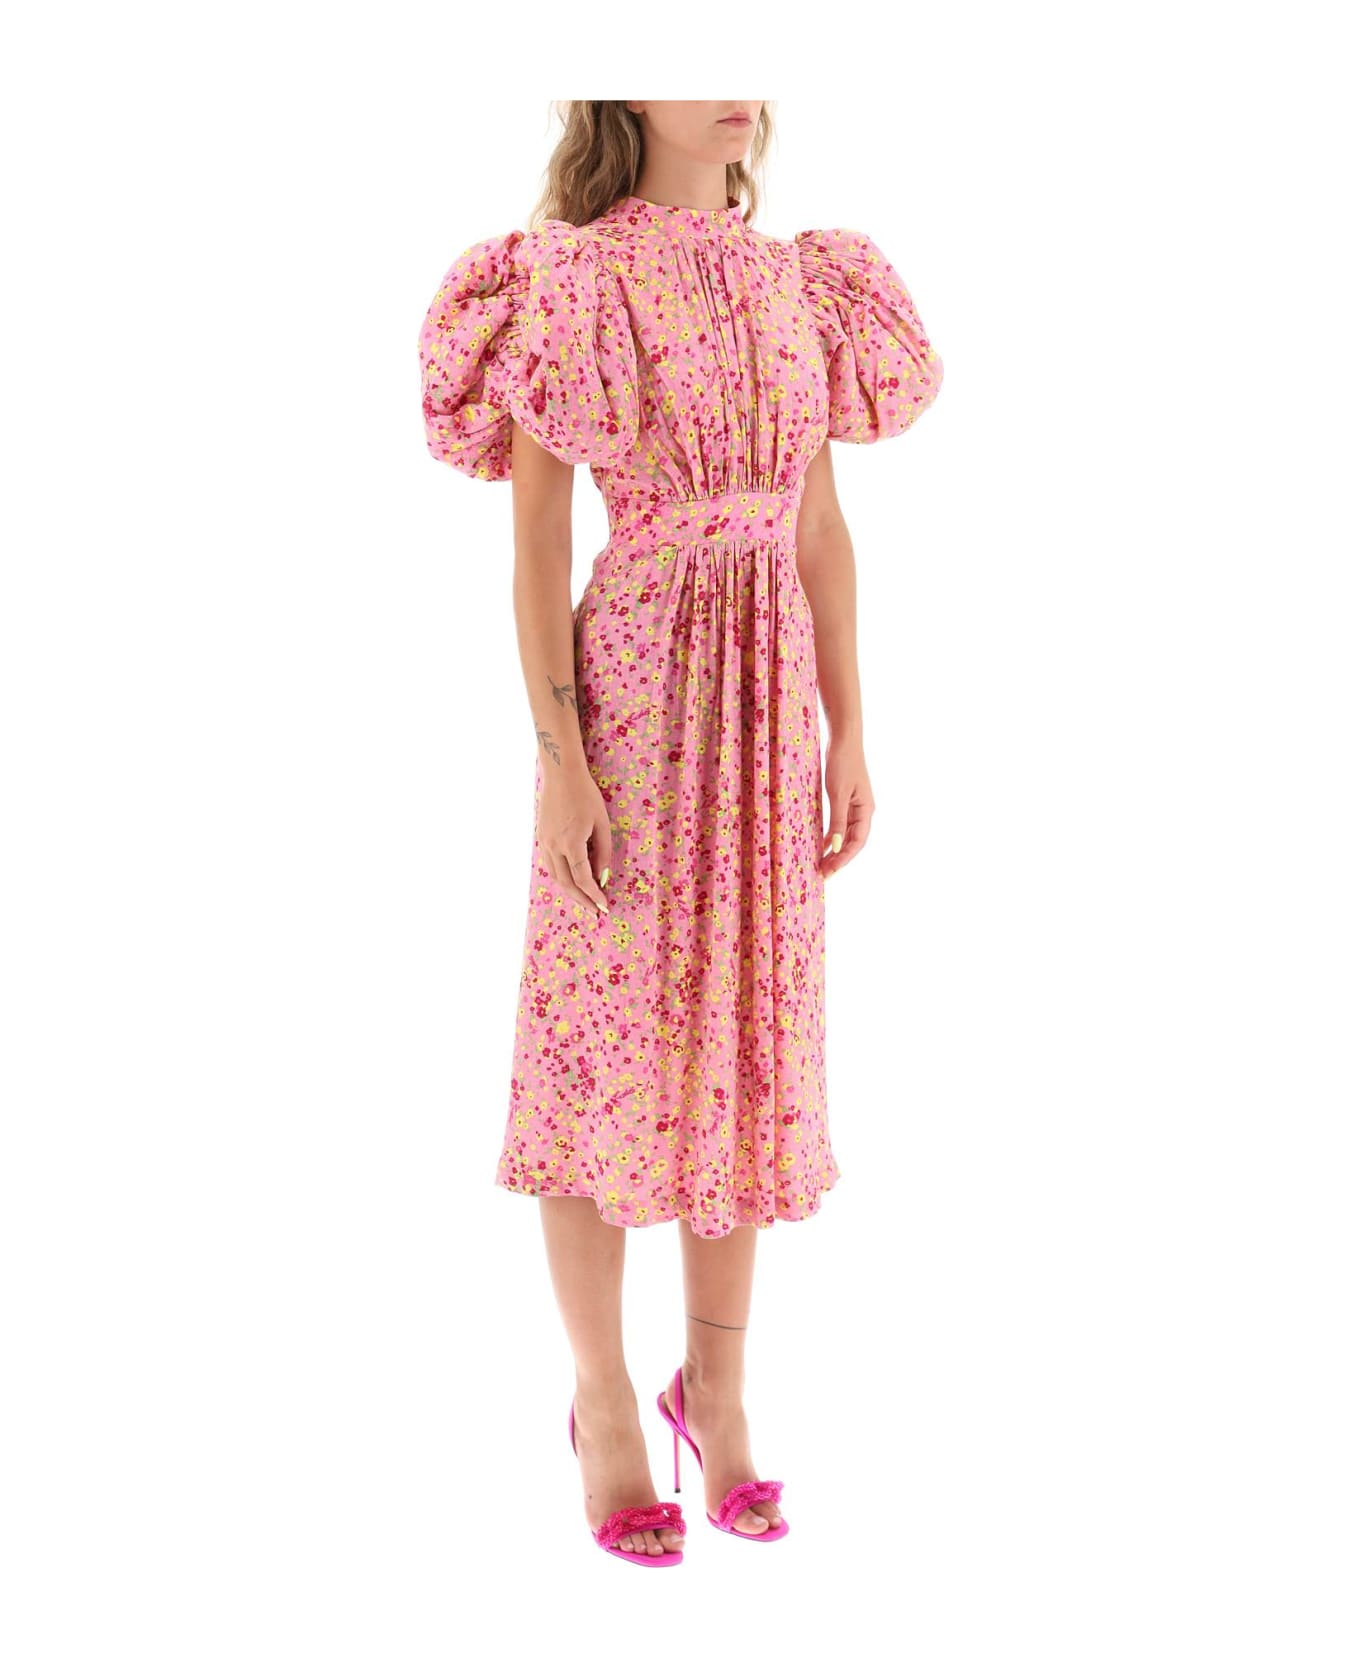 Rotate by Birger Christensen Jacquard Dress With Puffy Sleeves - FUCHSIA PINK COMB (Pink)